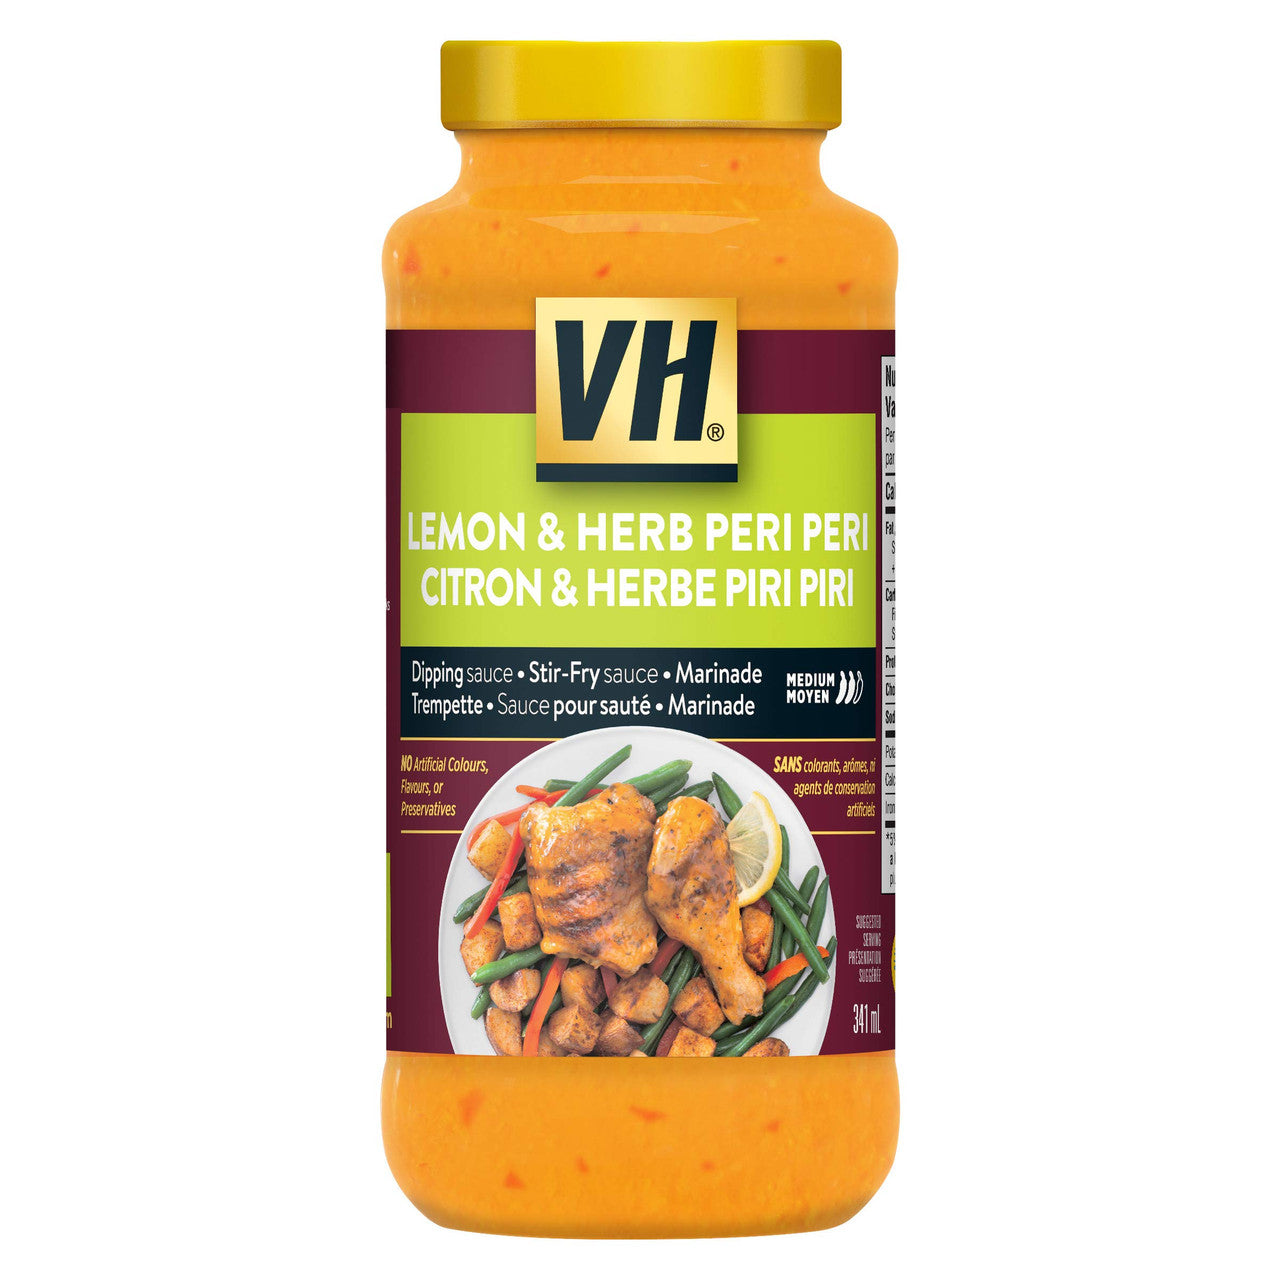 VH Lemon and Herb Peri Peri Sauce, 341ml/11.5 fl. oz., (12 count) {Imported from Canada}